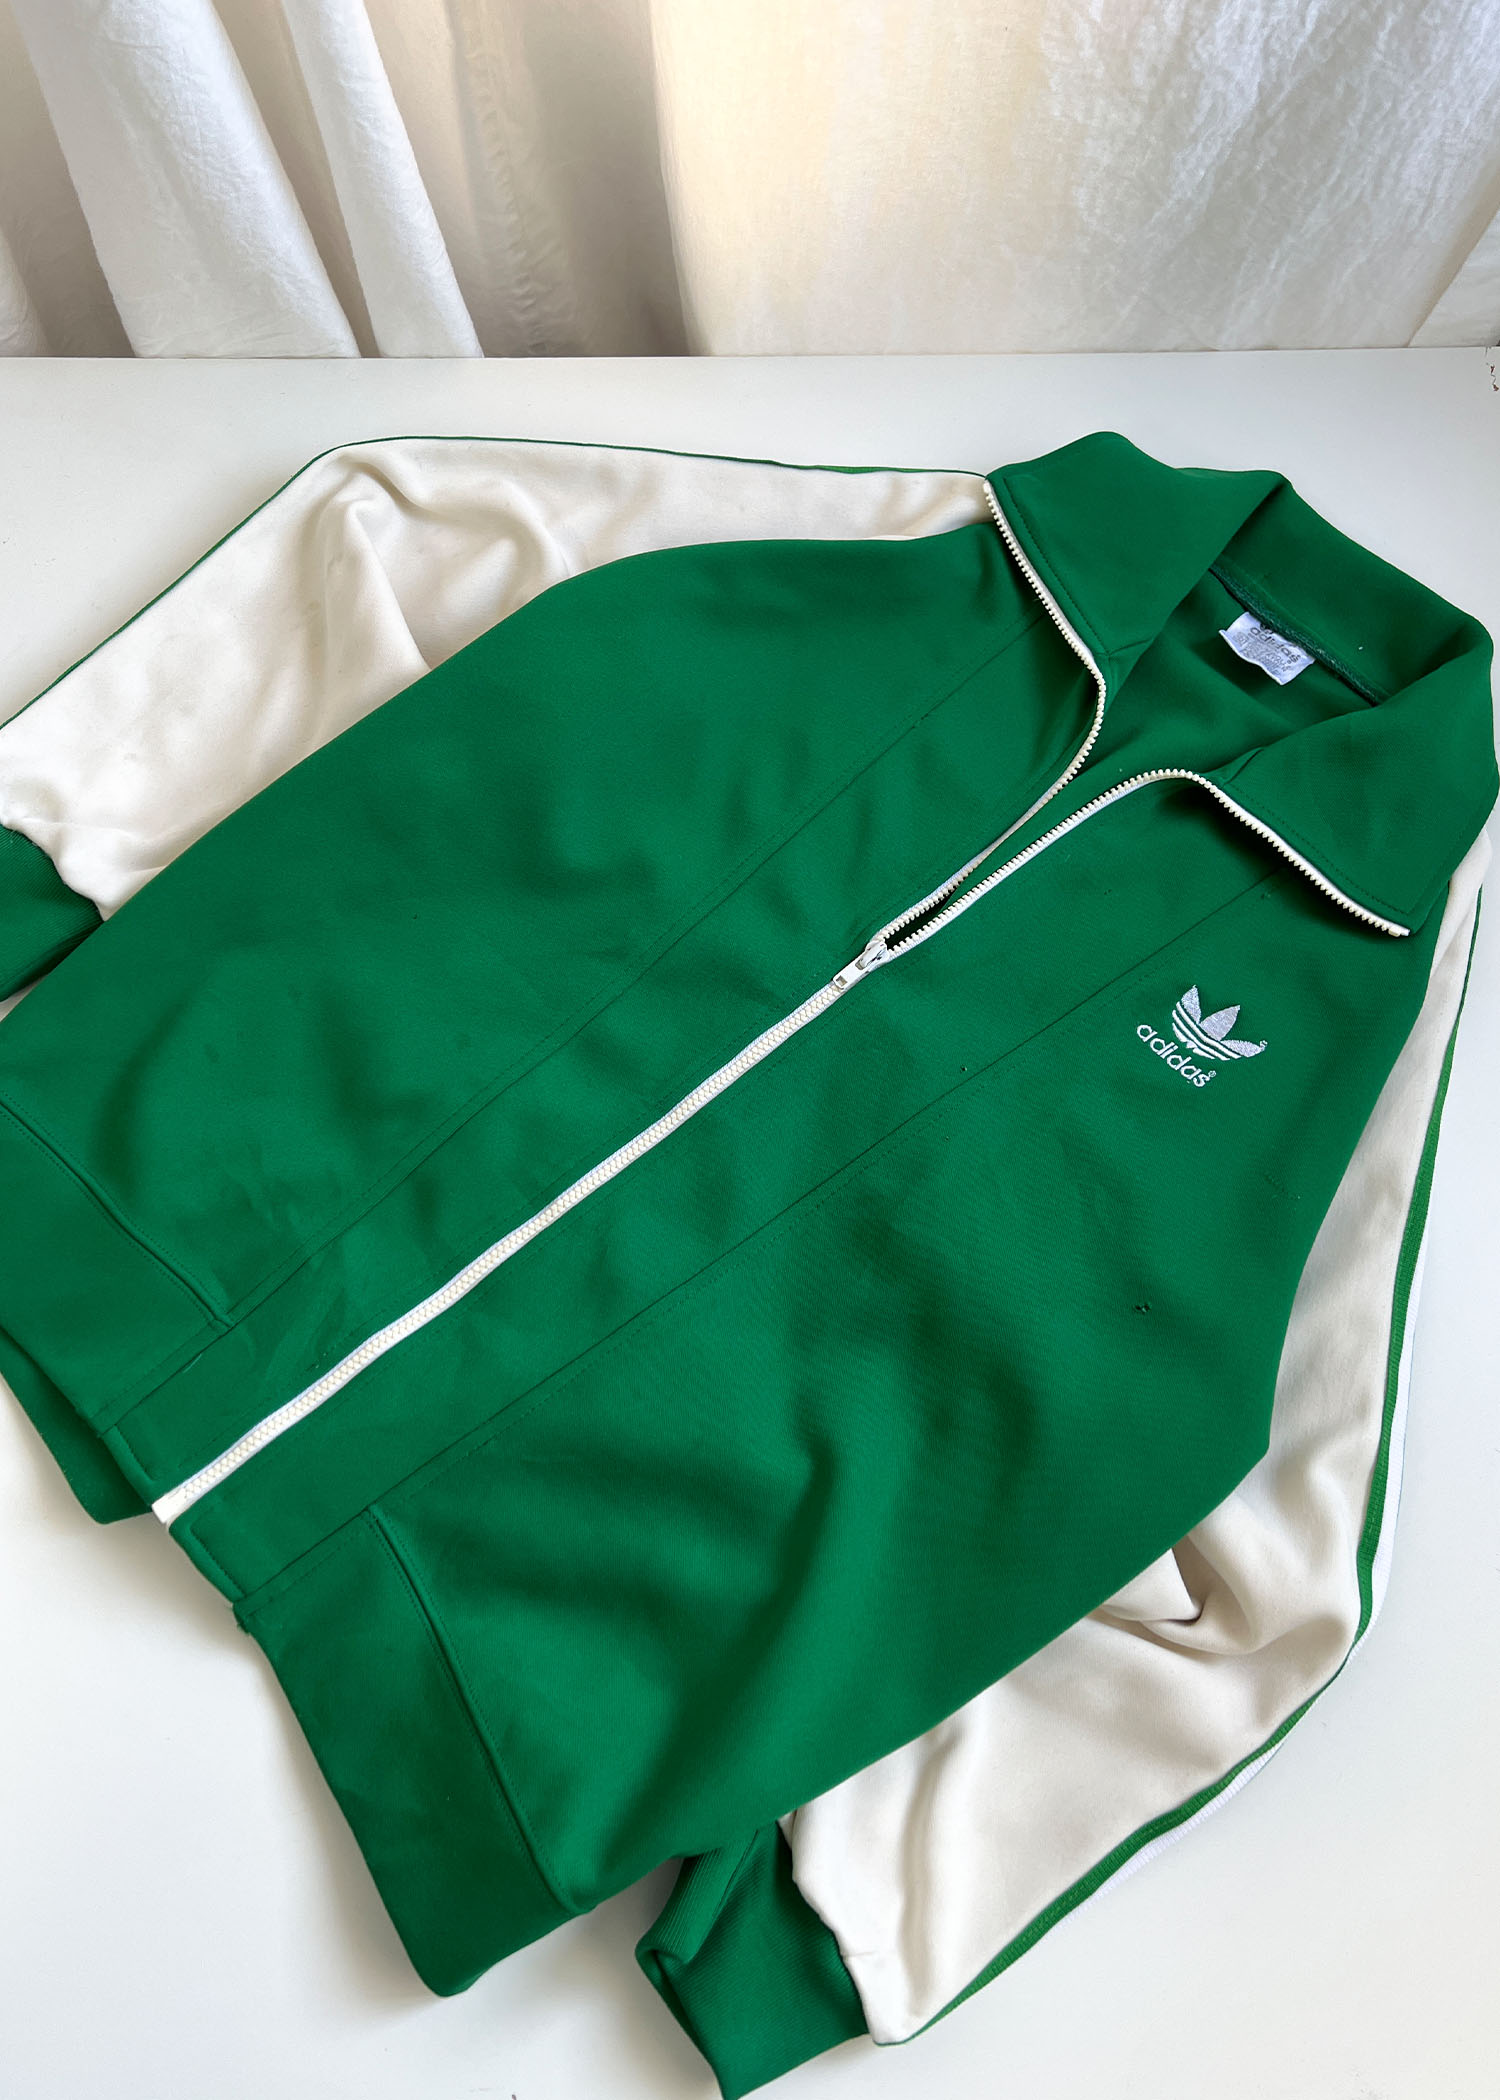 old ADIDAS jersey